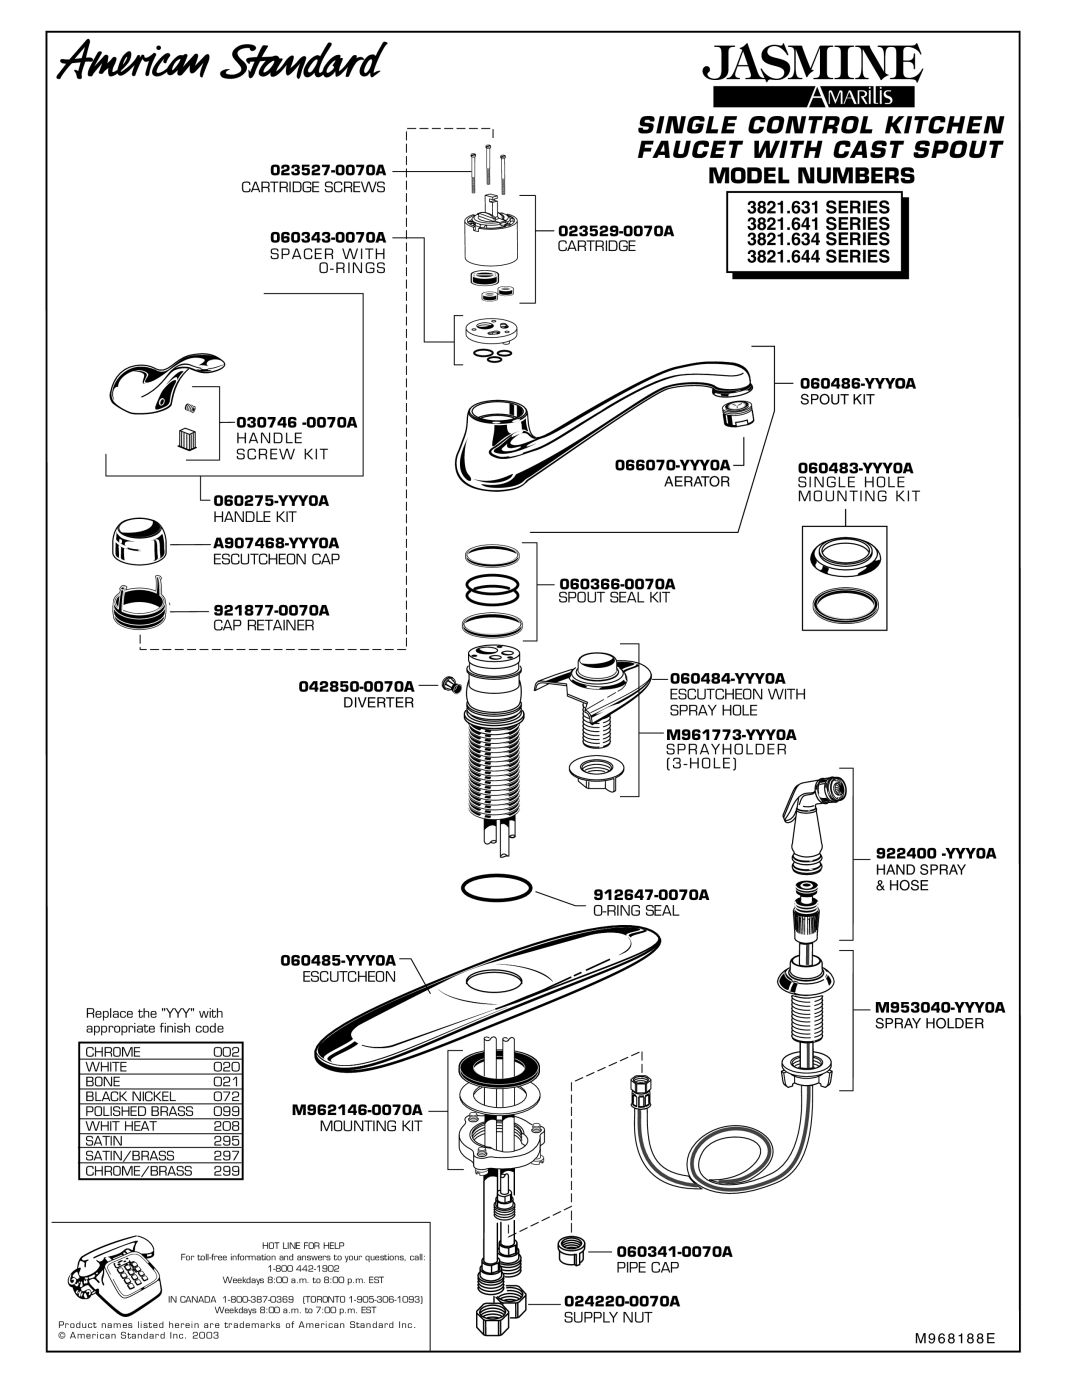 American Standard 3821.641 Series, 3821.634 Series Model Numbers, Single Control Kitchen Faucet With Cast Spout 